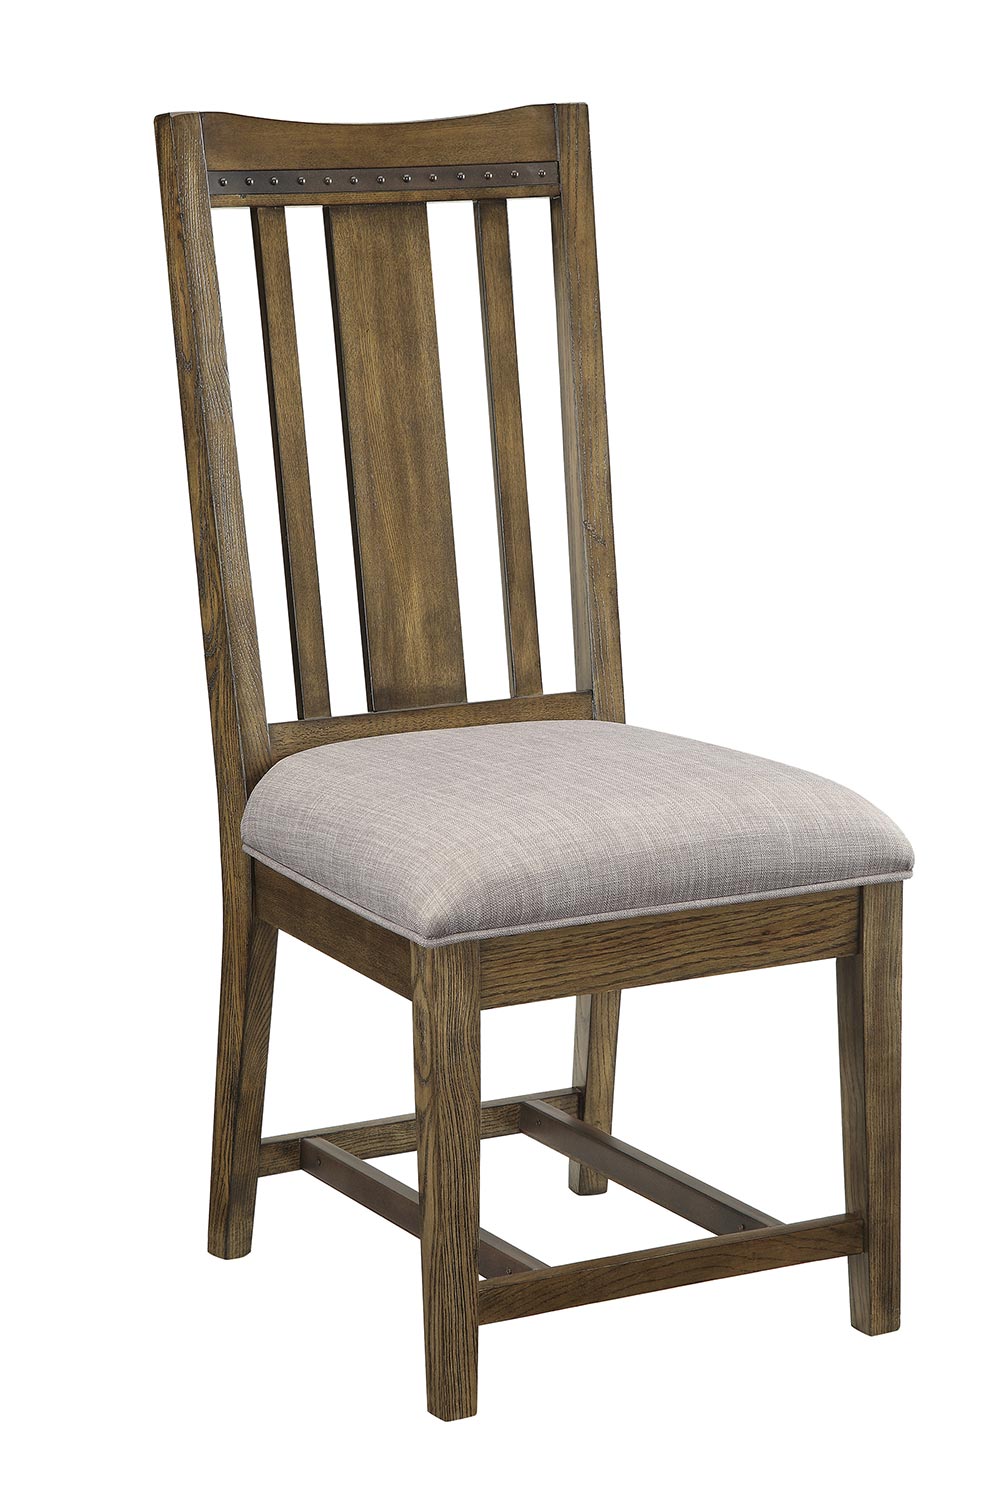 Coaster Willowbrook Dining Side Chair - Rustic Ash/Gunmetal